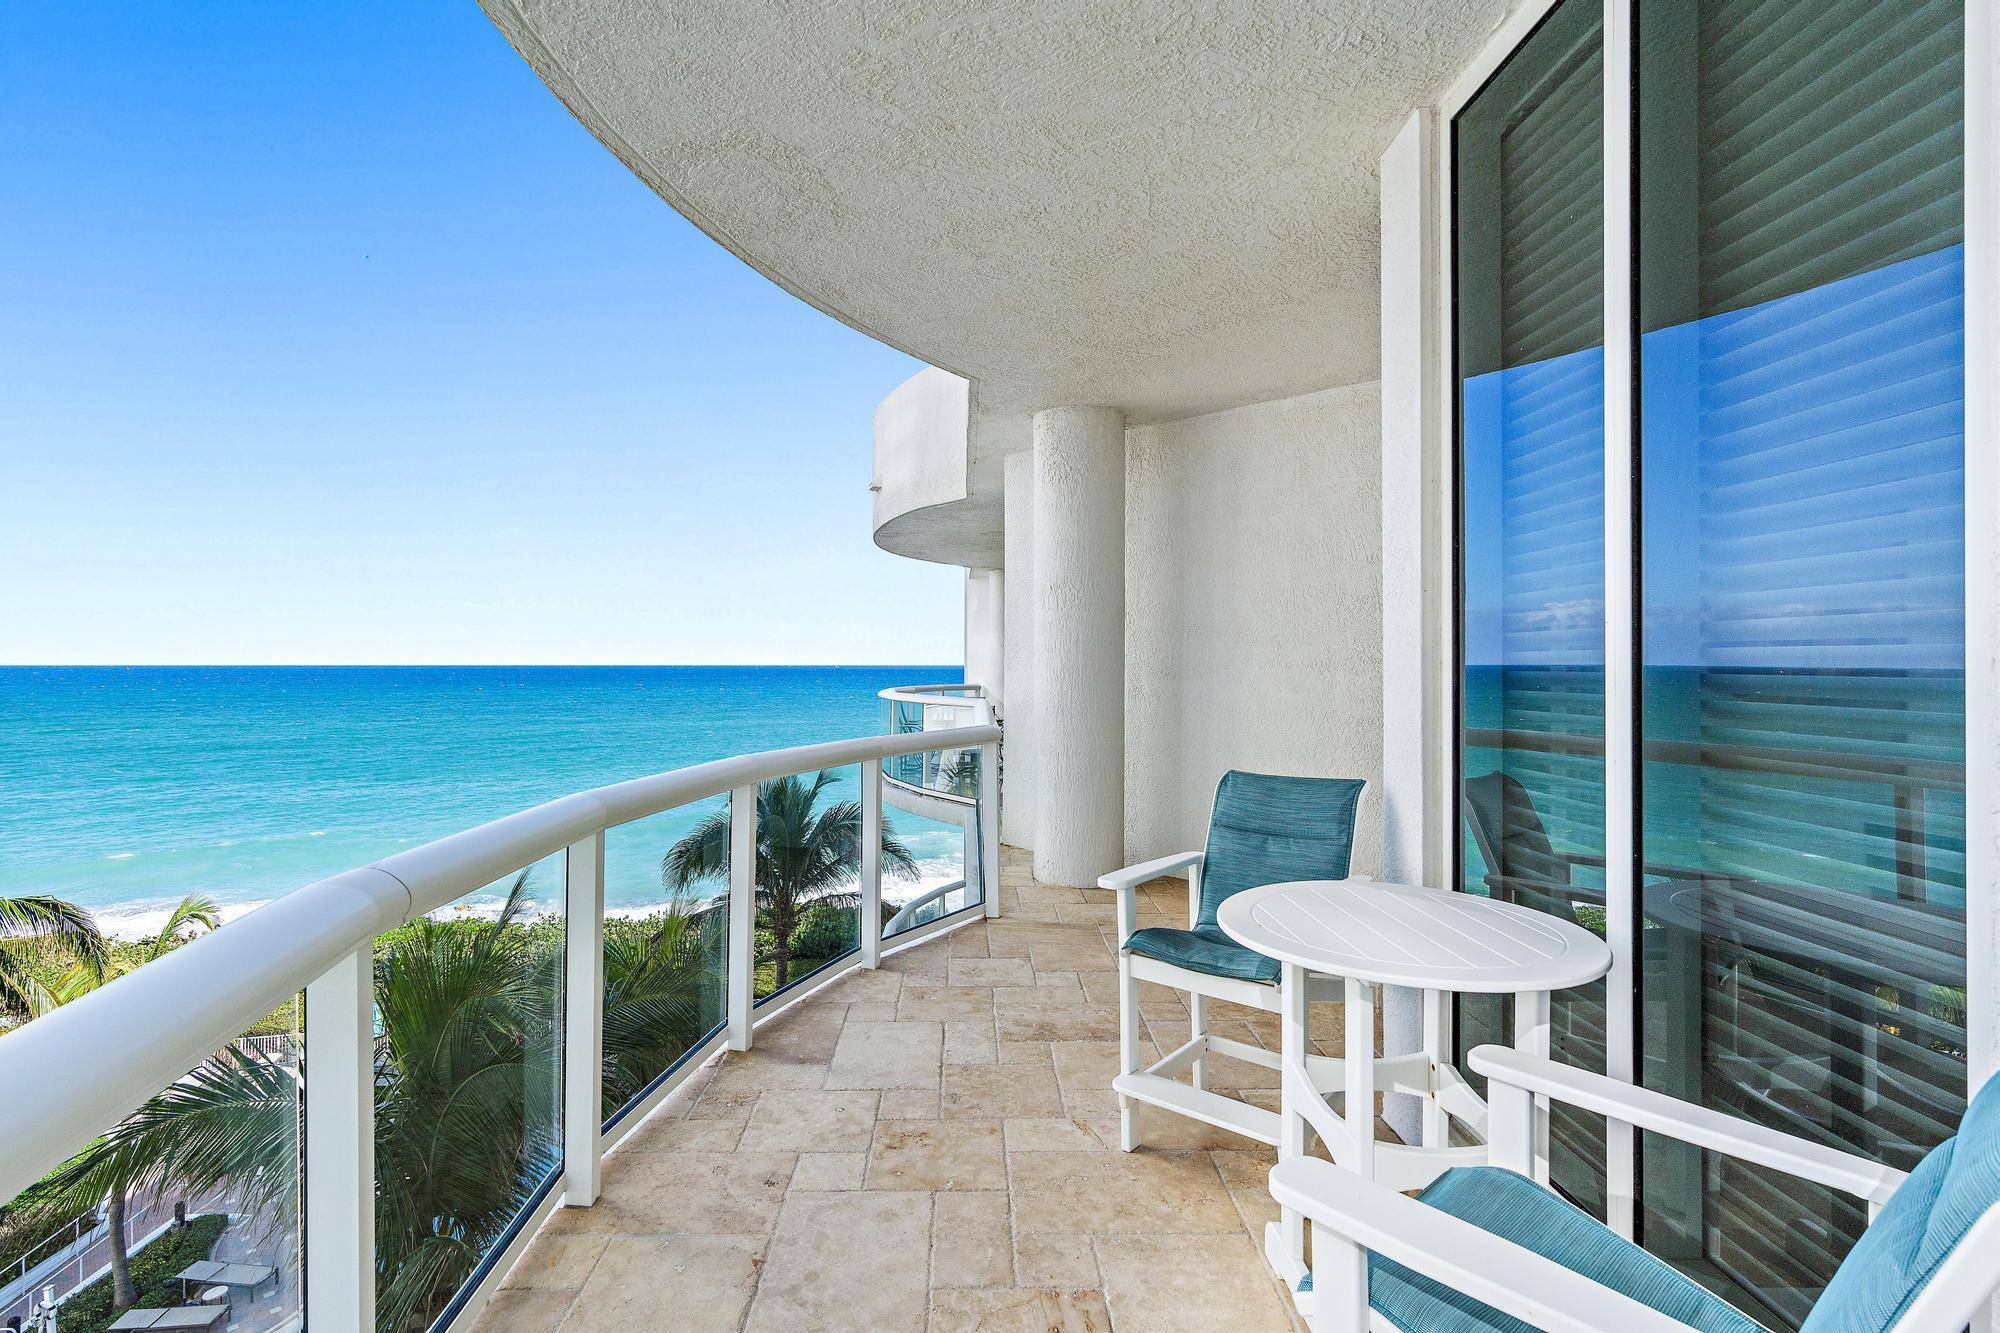 Oceanfront renovated townhome with 3 bedrooms each bedroom including private en suite baths.